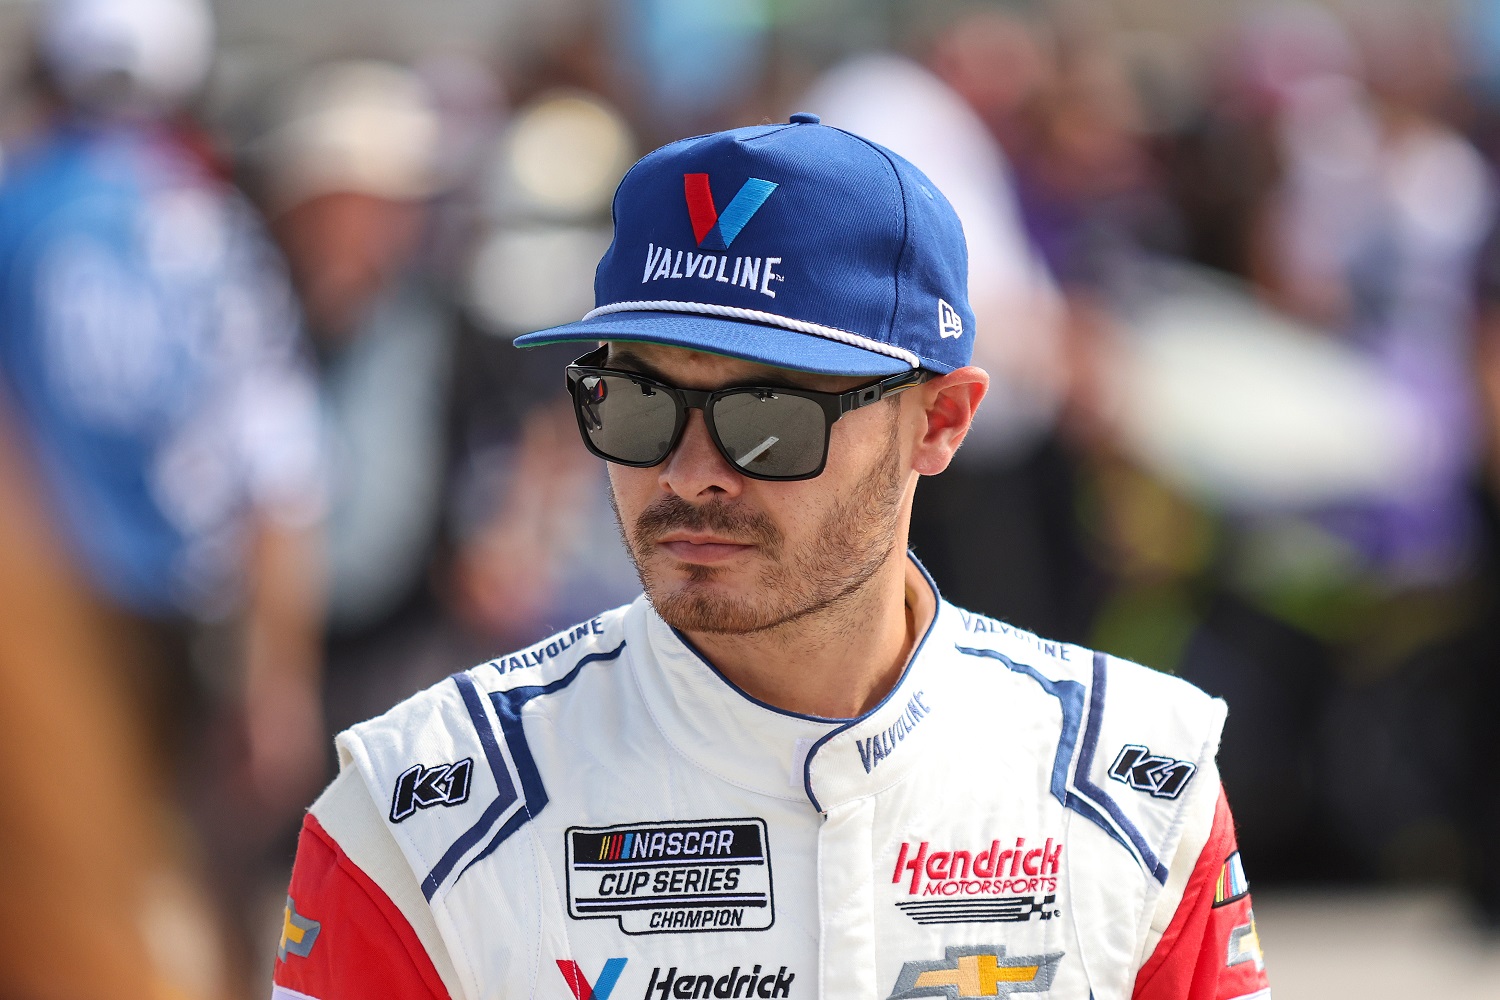 Kyle Larson looks on during qualifying for the NASCAR Cup Series Dixie Vodka 400 at Homestead-Miami Speedway on Oct. 22, 2022. | Jared East/Getty Images